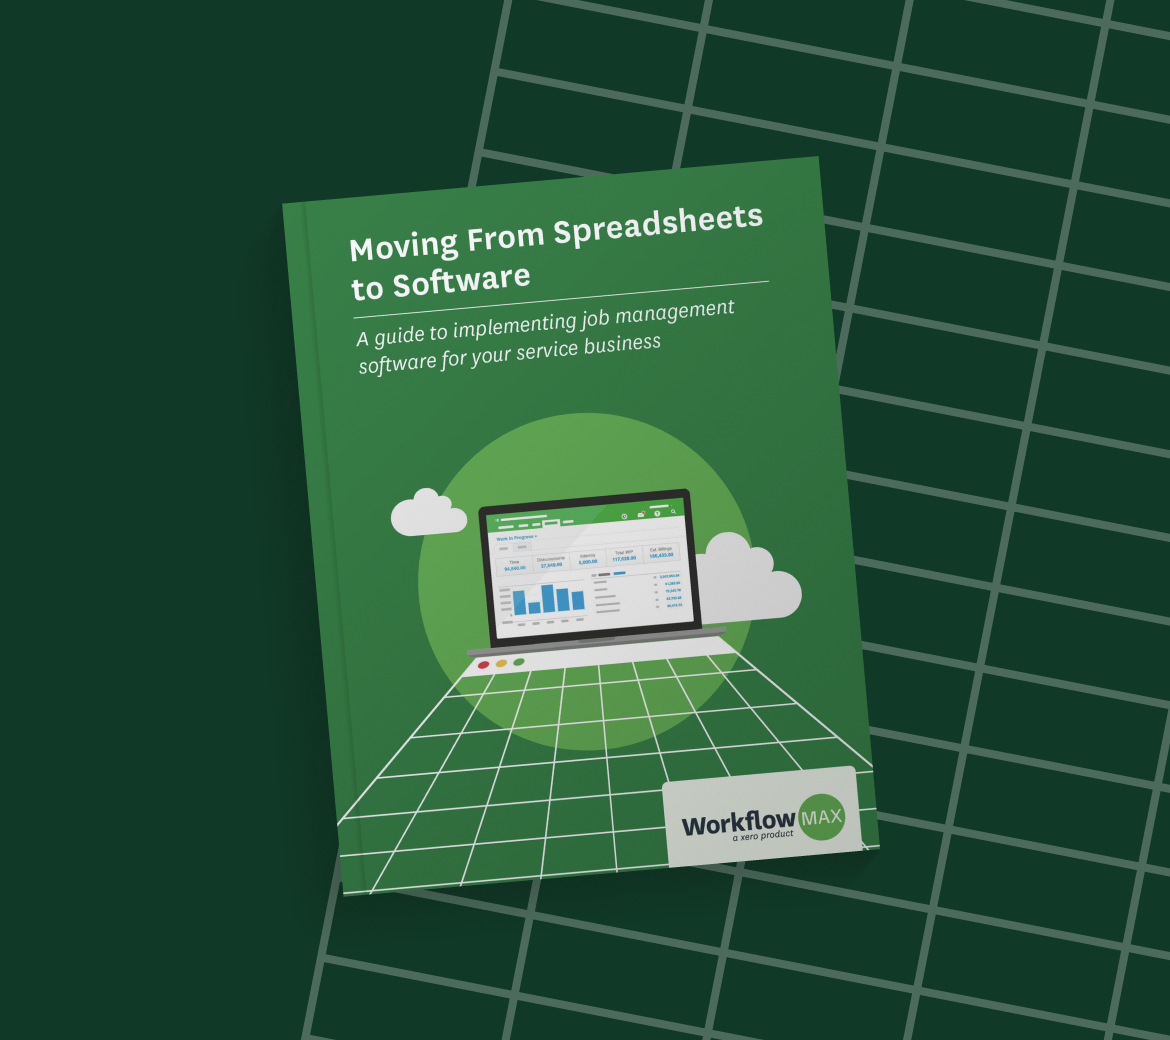 Free download: Moving From Spreadsheets to Software: A guide to implementing job management software